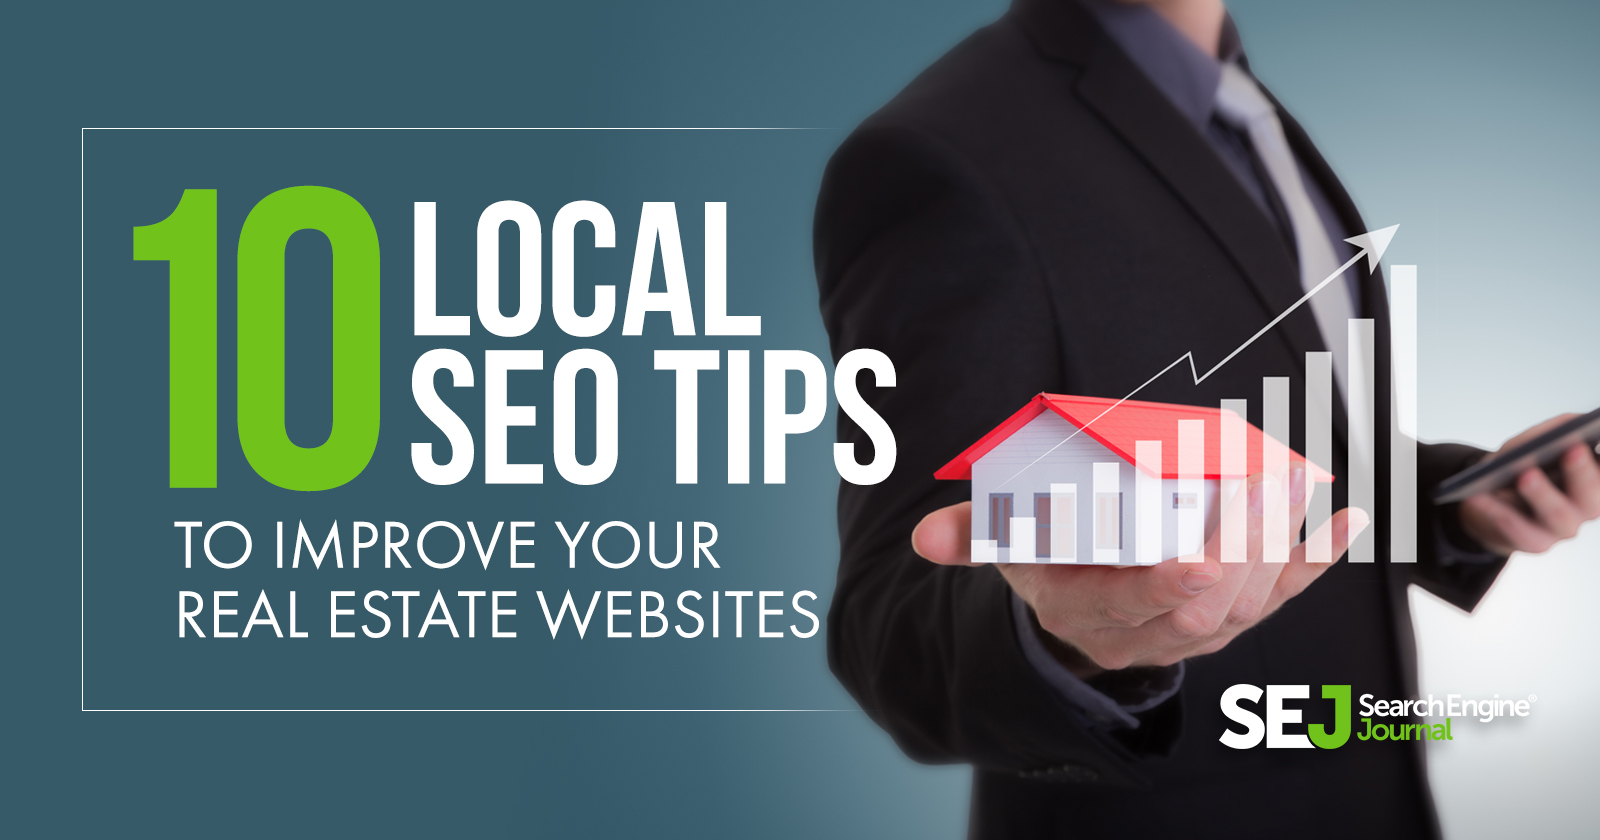 TIPS FOR BETTER RANKINGS IN LOCAL SEARCH